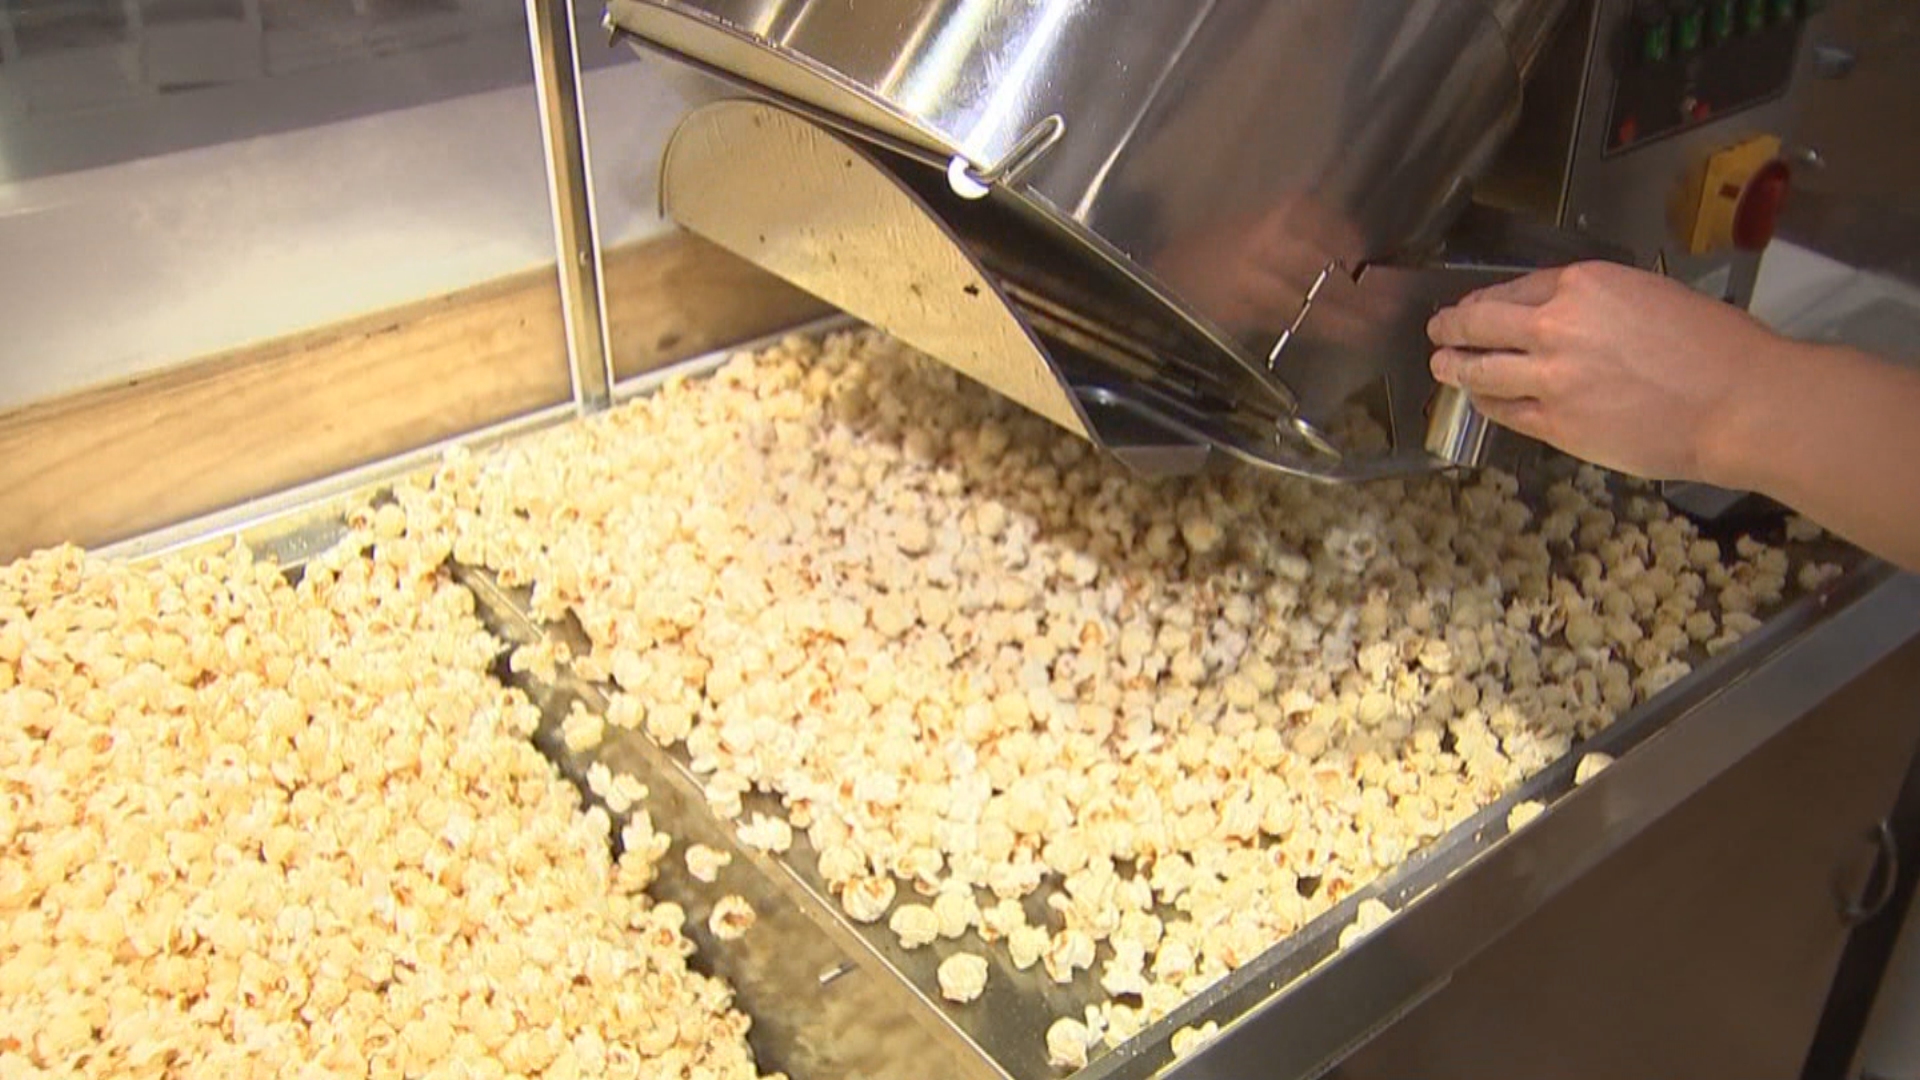 Clusters Handcrafted Popcorn Adds Unique Twist On Favorite Snack On Wildwood Boardwalk – CBS Philly